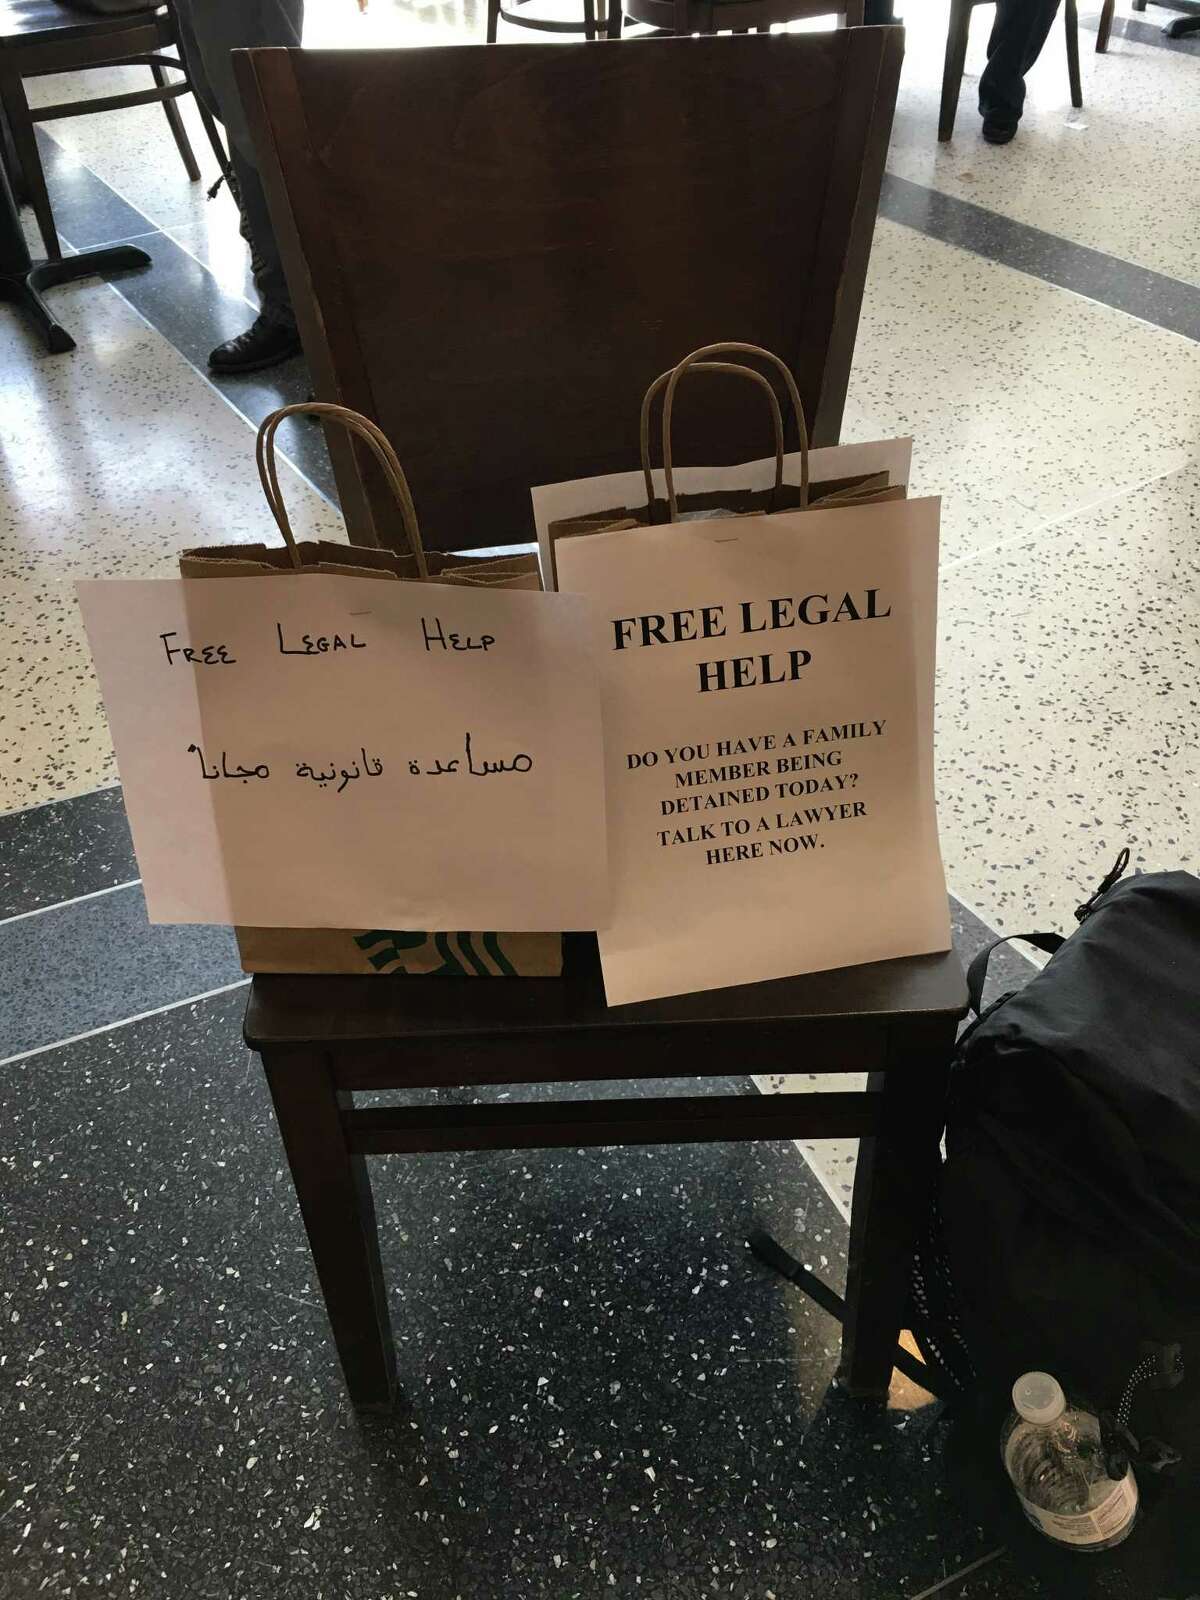 Lawyers set up signs at IAH to let travelers know they can get free help.